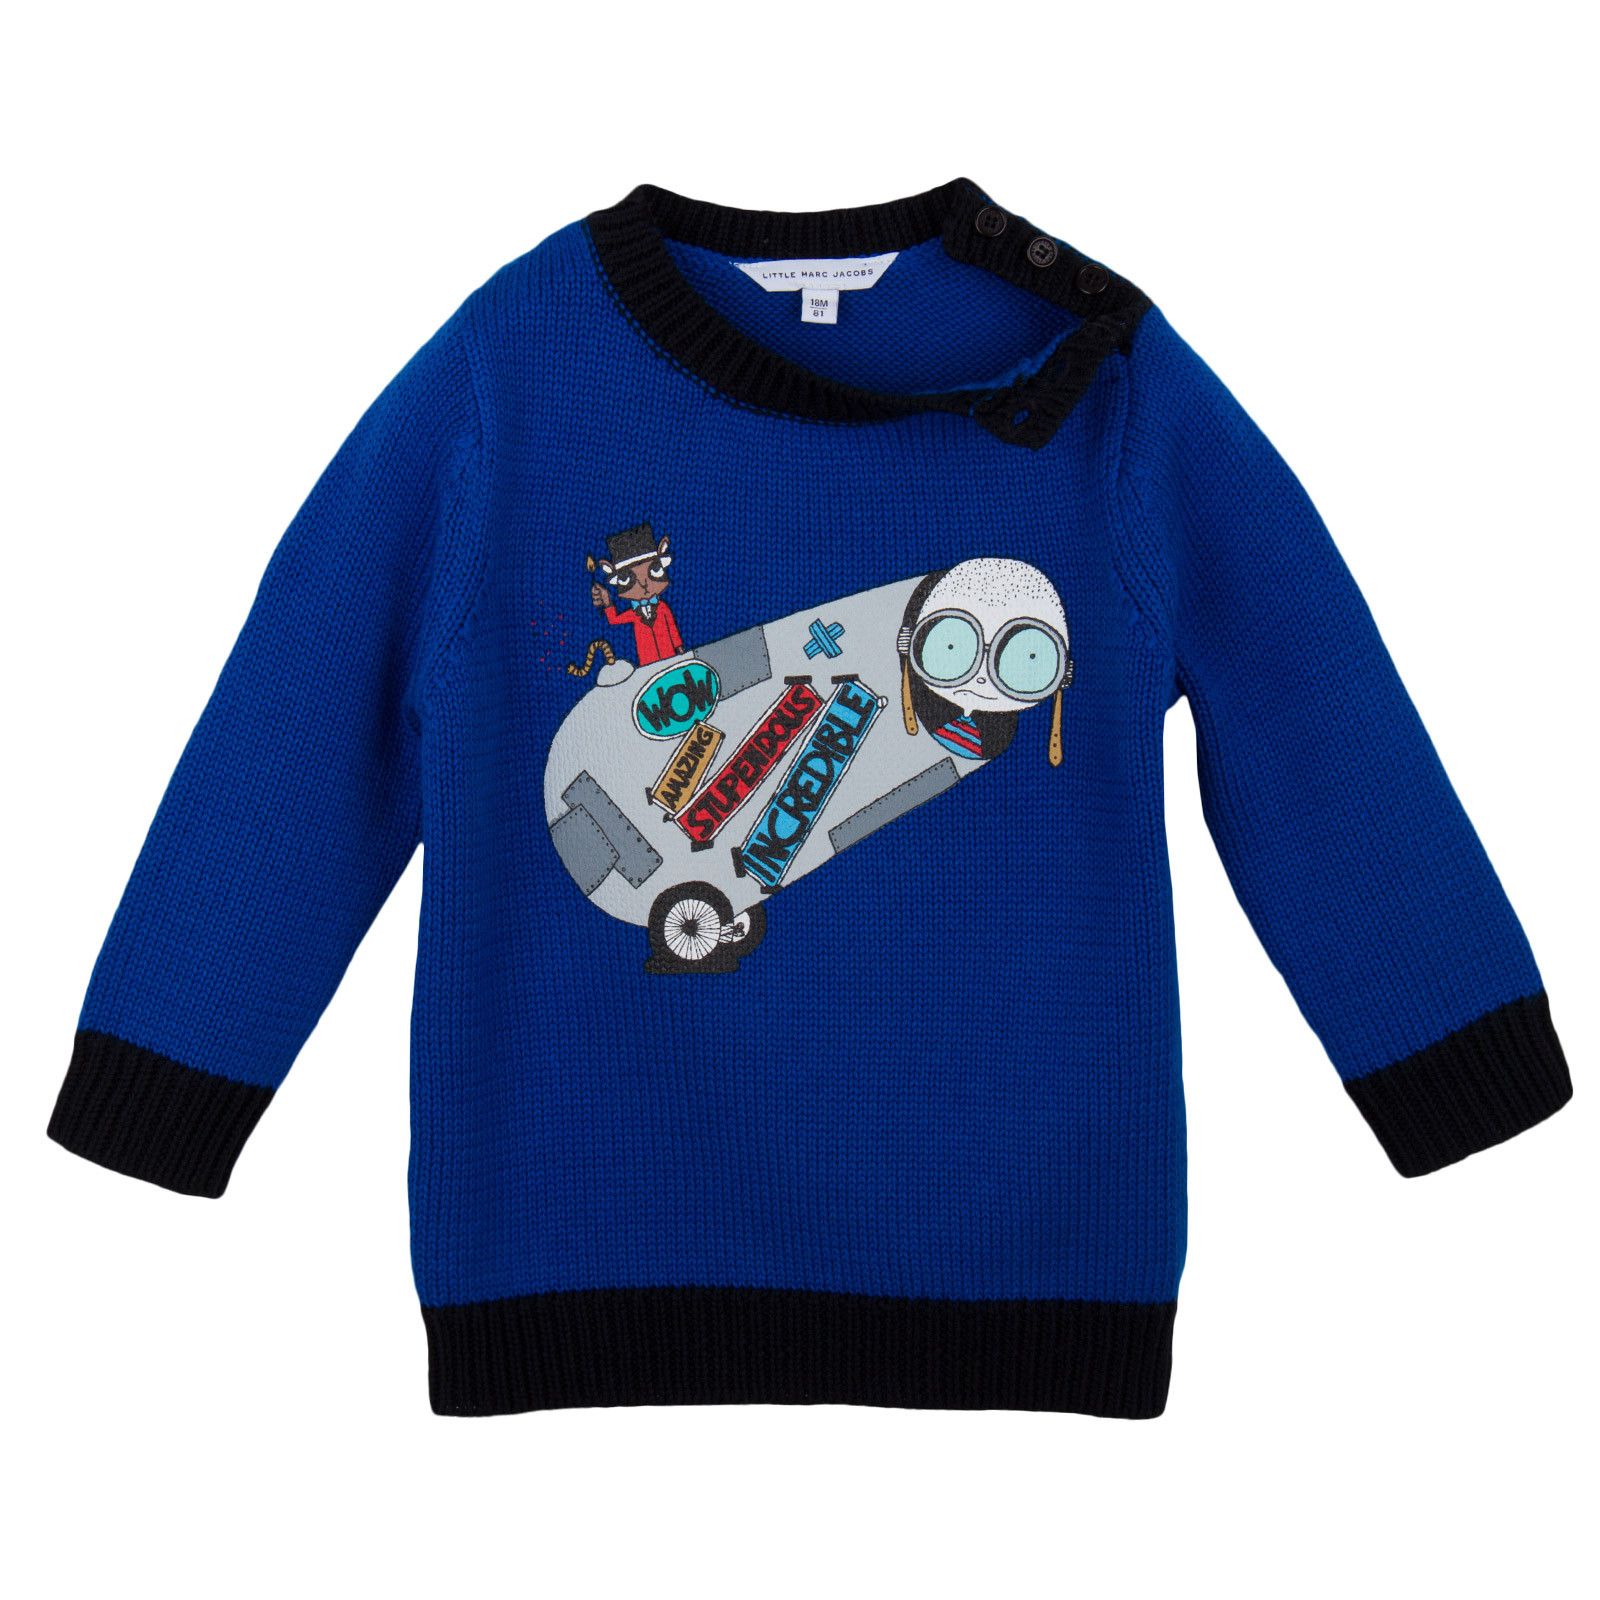 Baby Boys Blue 'Mr Marc' Knitted Sweater - CÉMAROSE | Children's Fashion Store - 3